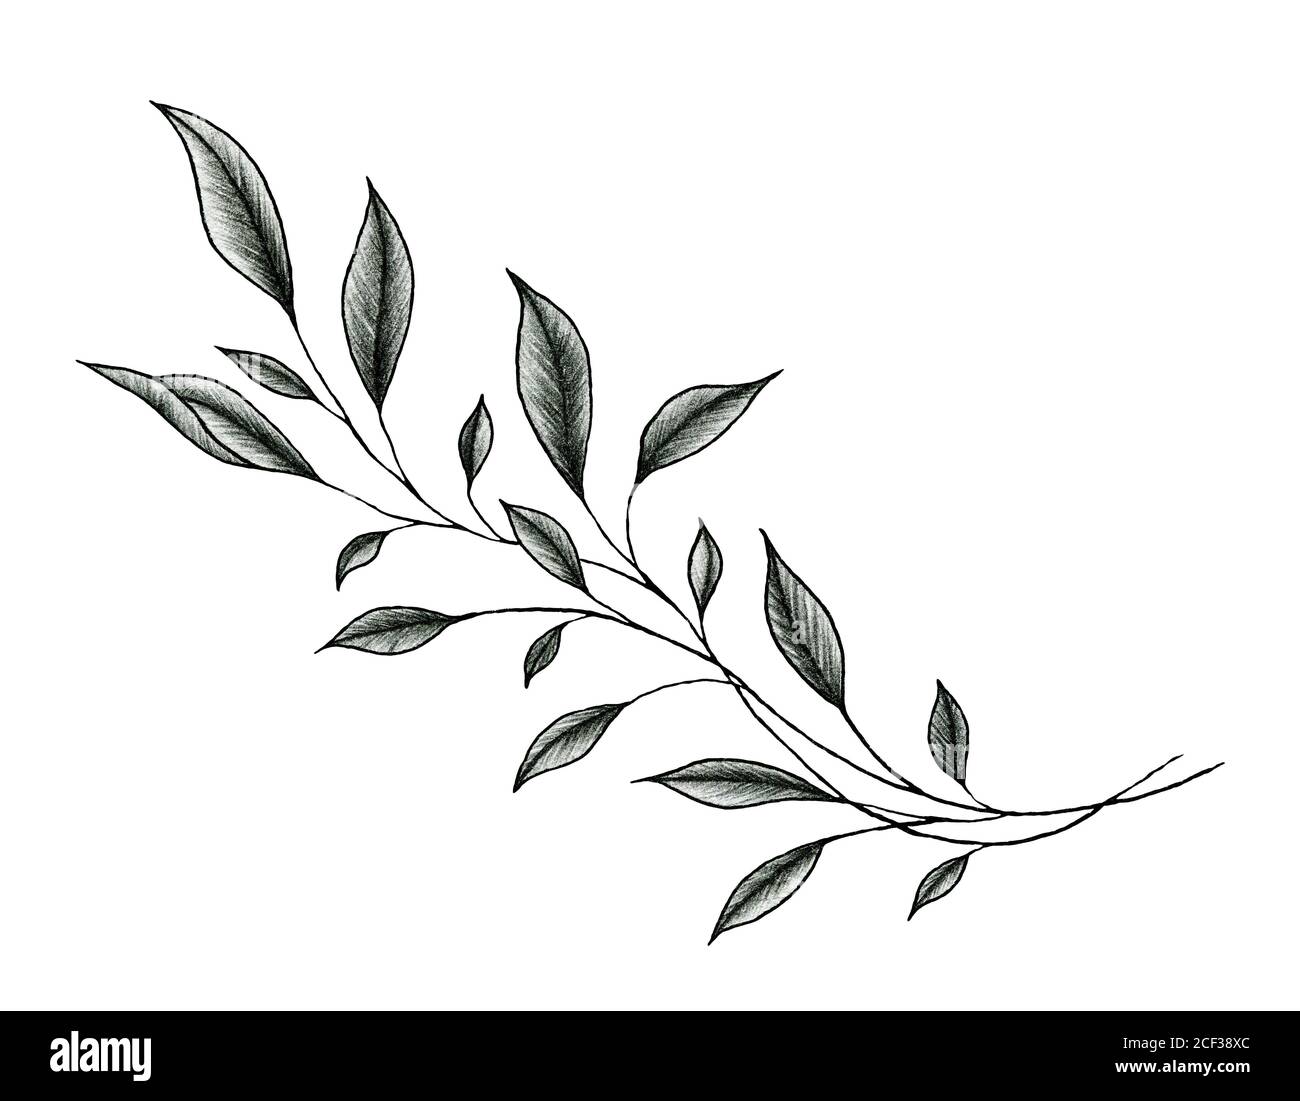 vintage leaf drawing isolated on white, ink hand drawn botanical  illustration of a plant branch, black floral sketch Stock Photo - Alamy